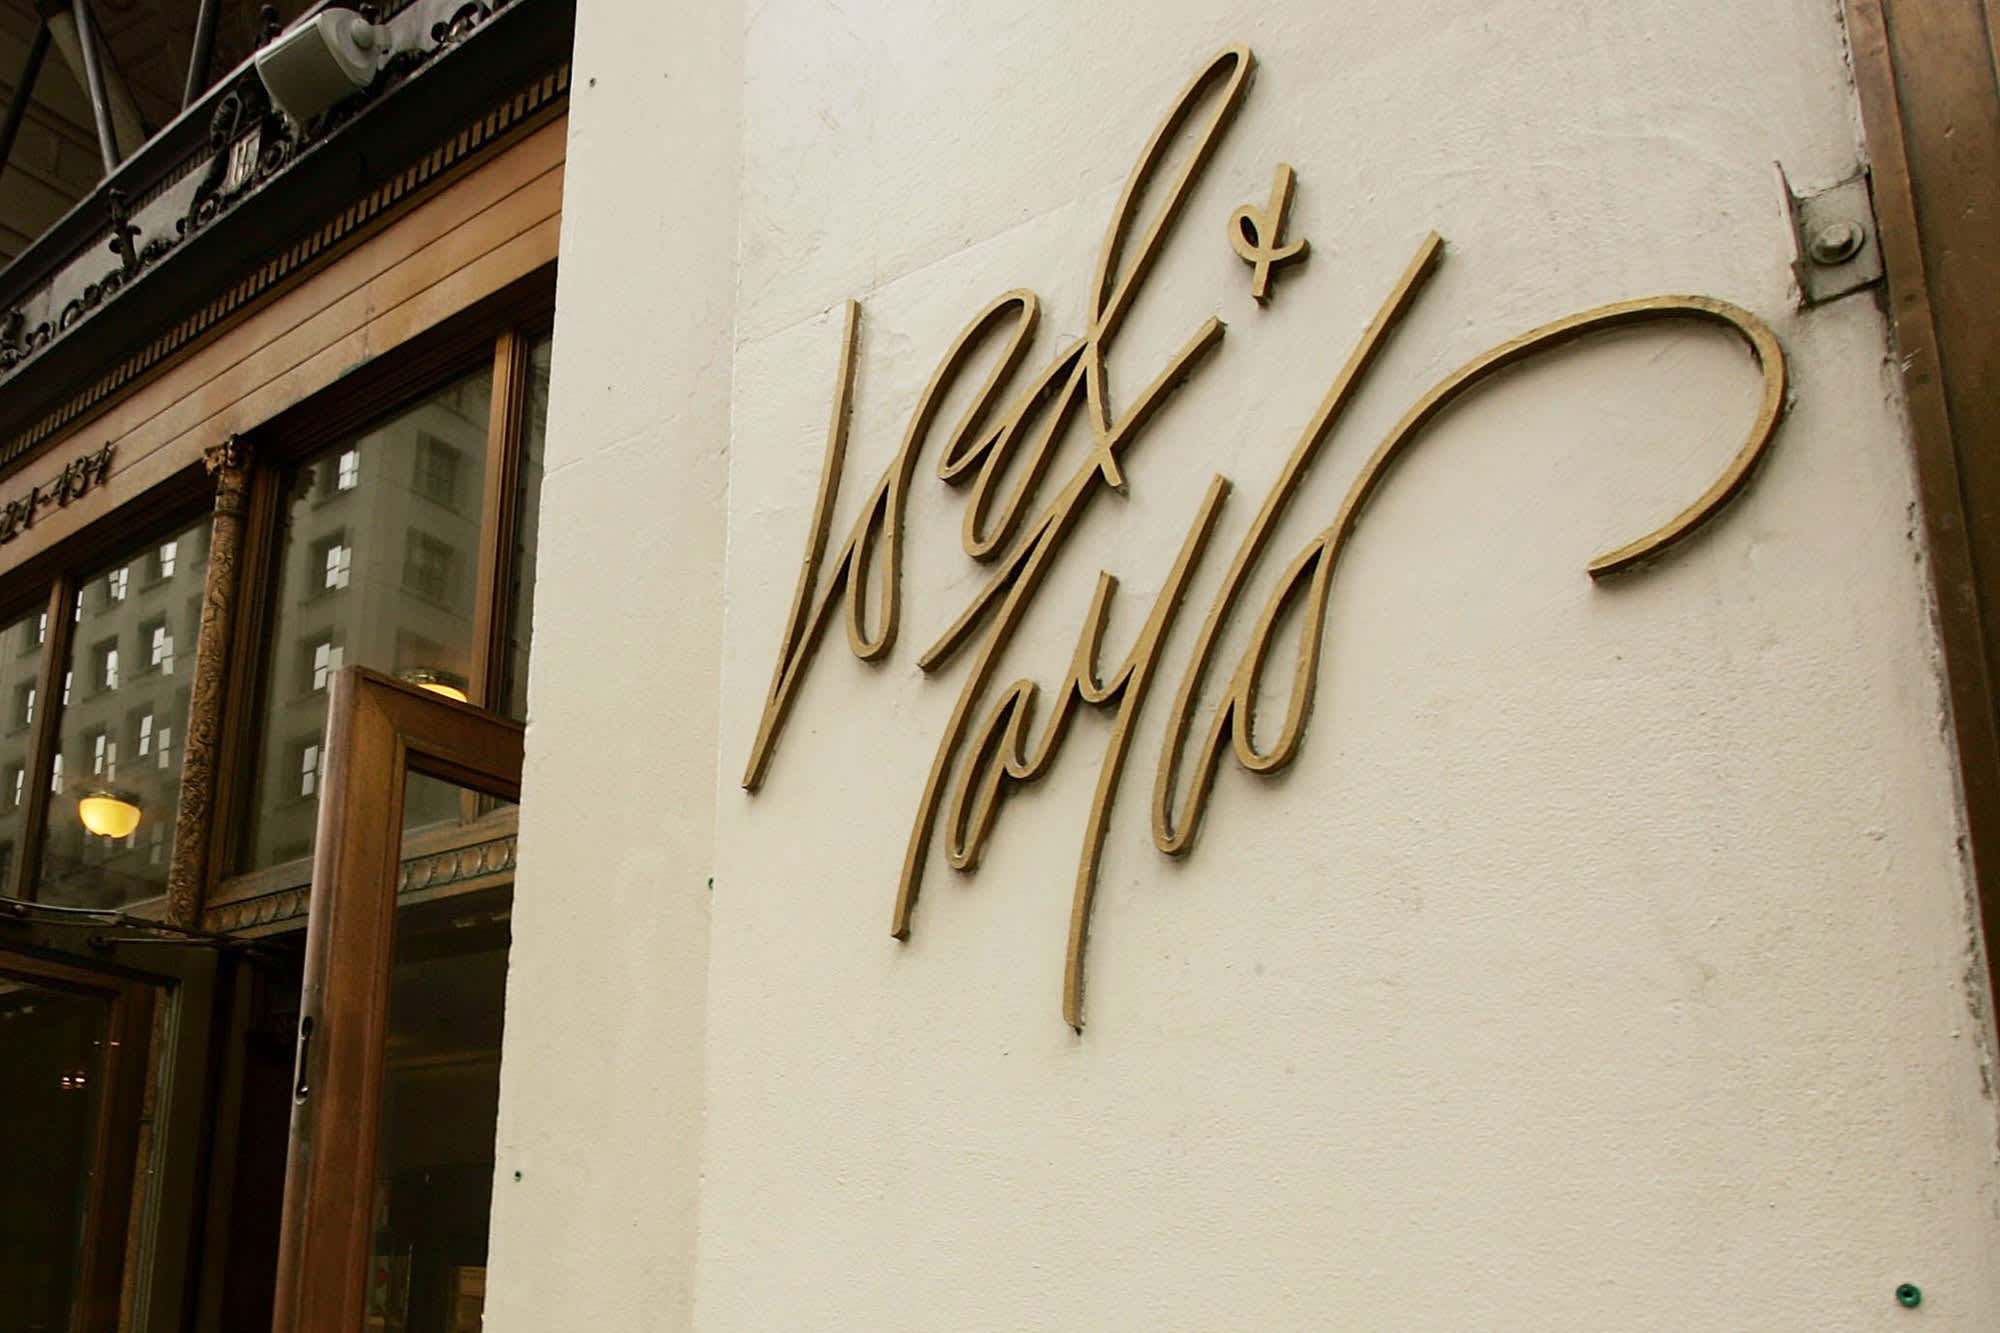 Luxury Department Store Lord & Taylor Has Filed for Bankruptcy